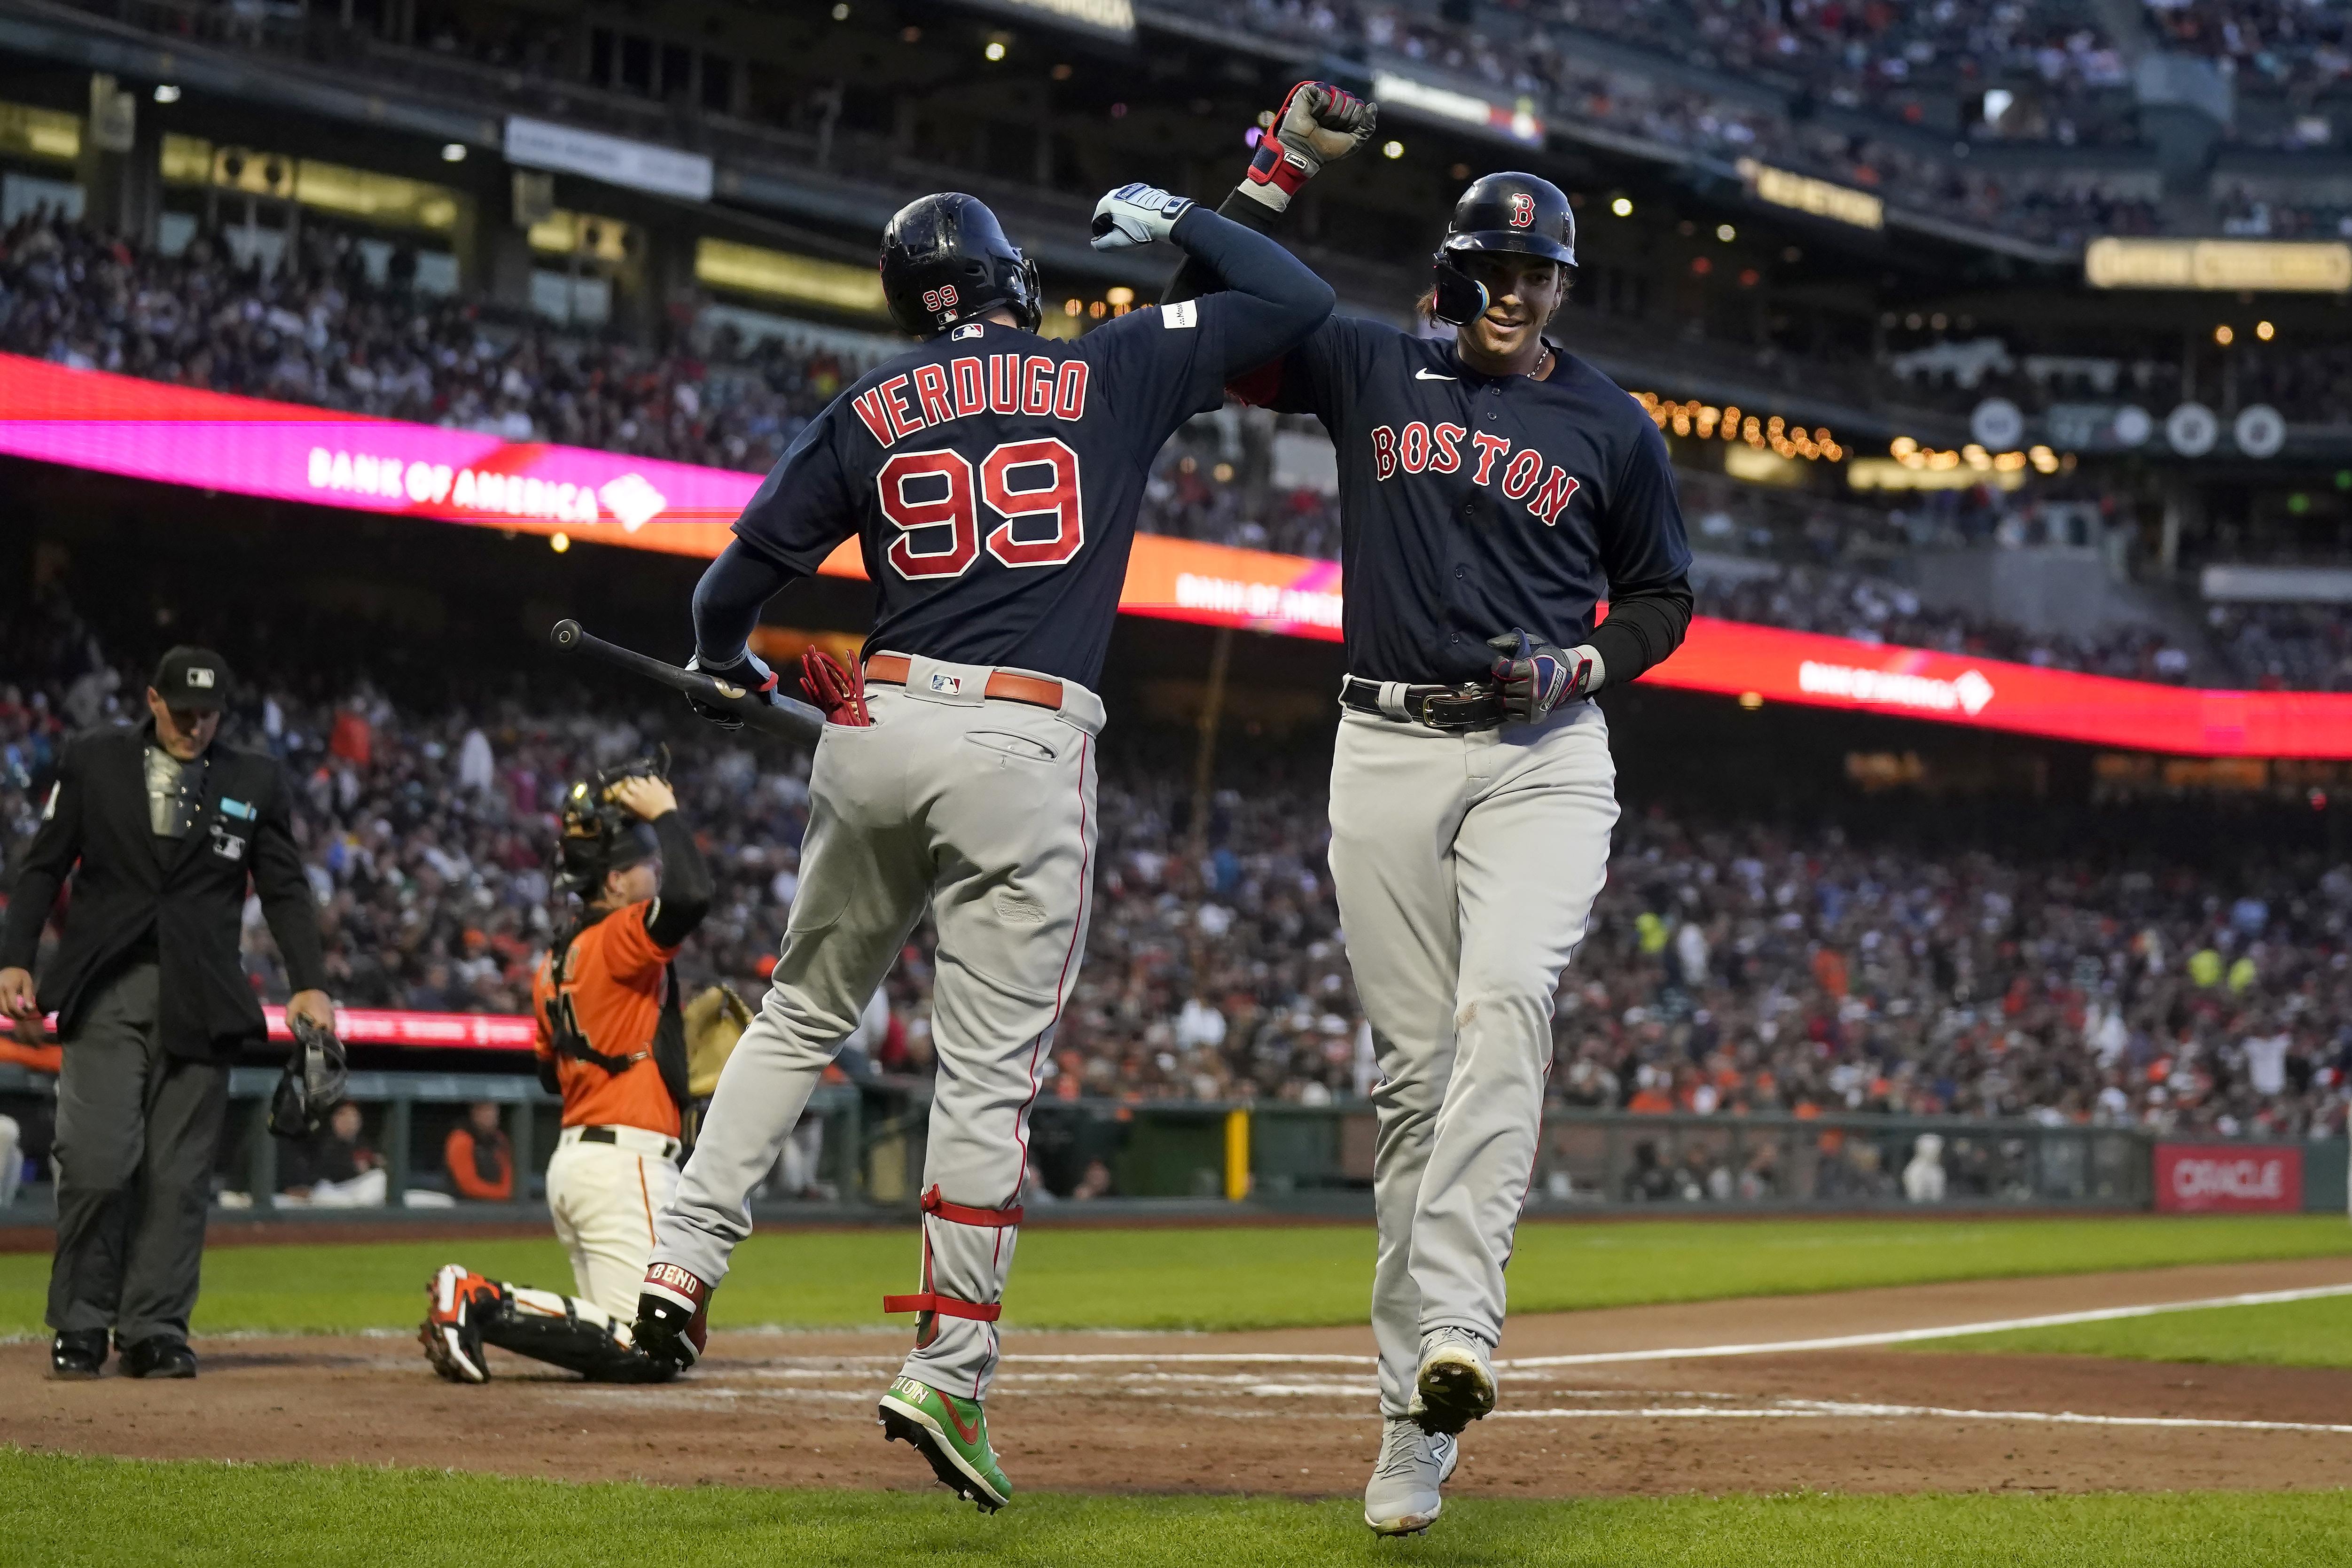 Red Sox squeeze out a win over Diamondbacks, 2-1